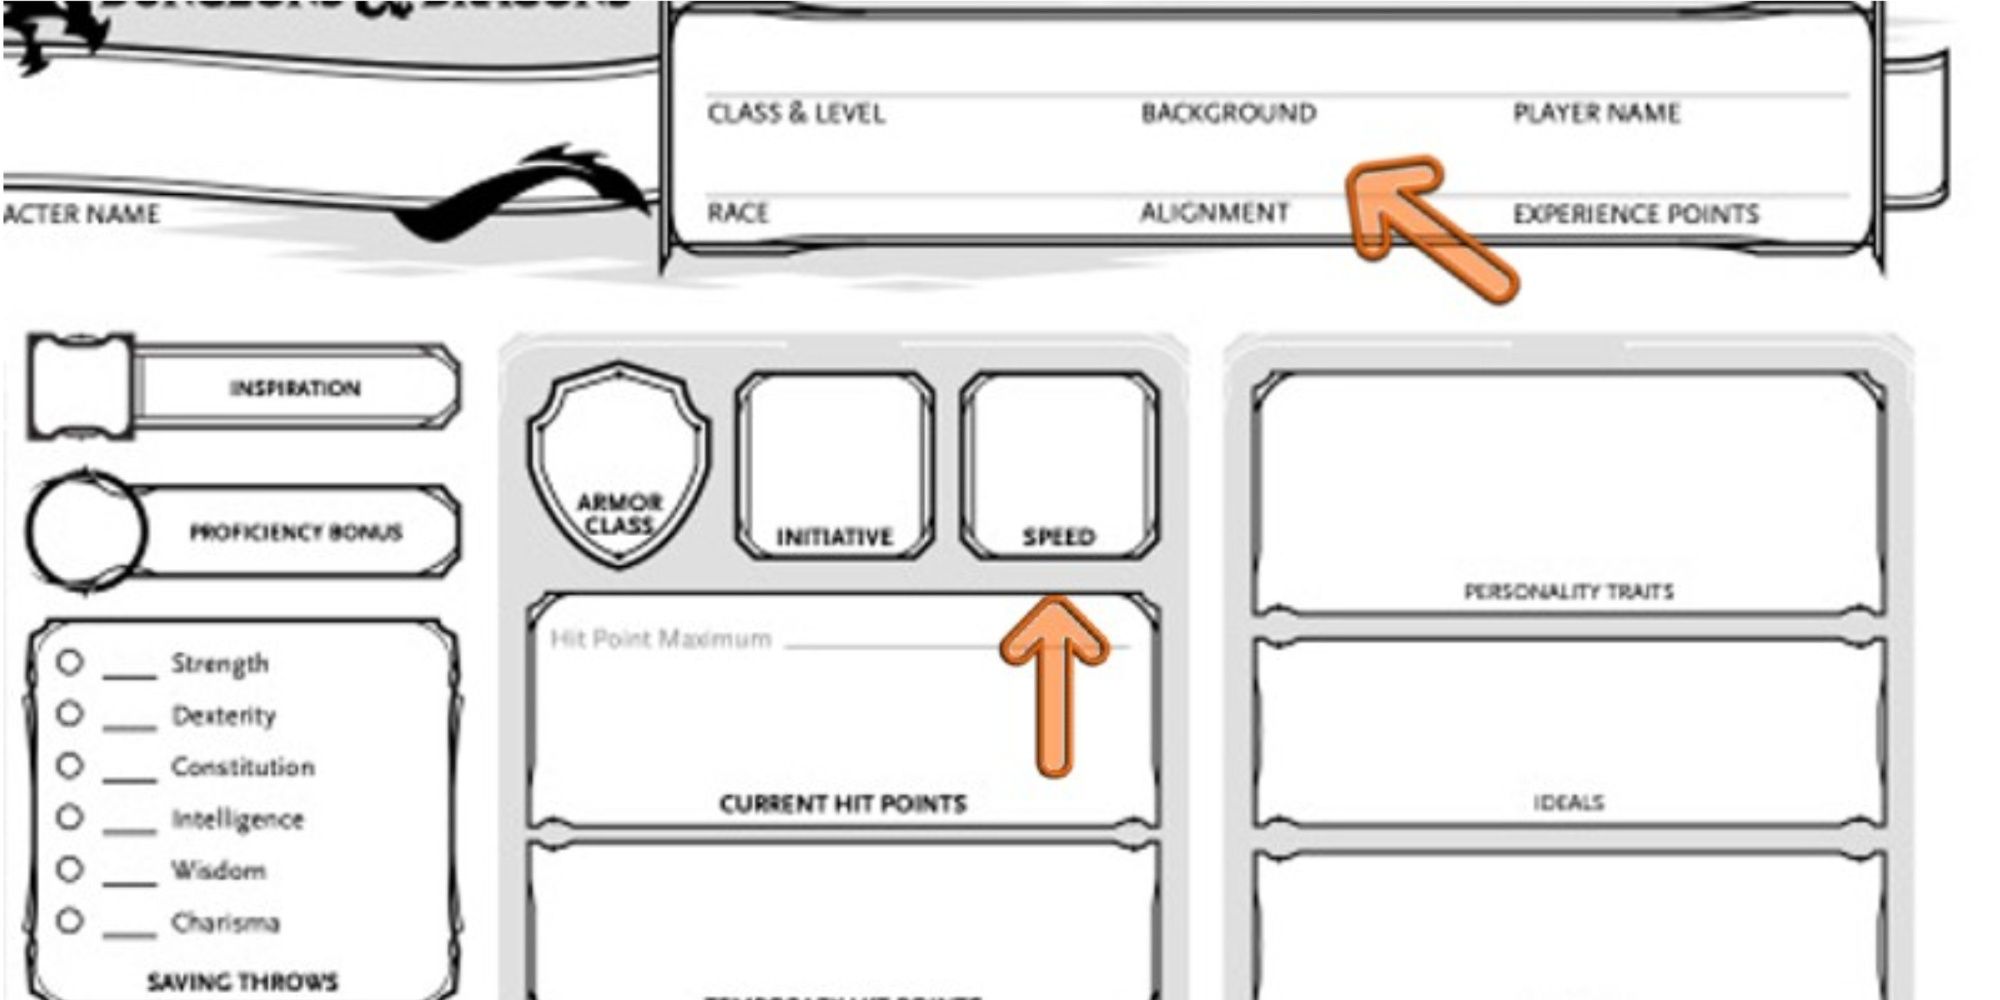 Character Sheet Form Alignment/Background and Speed pointed out